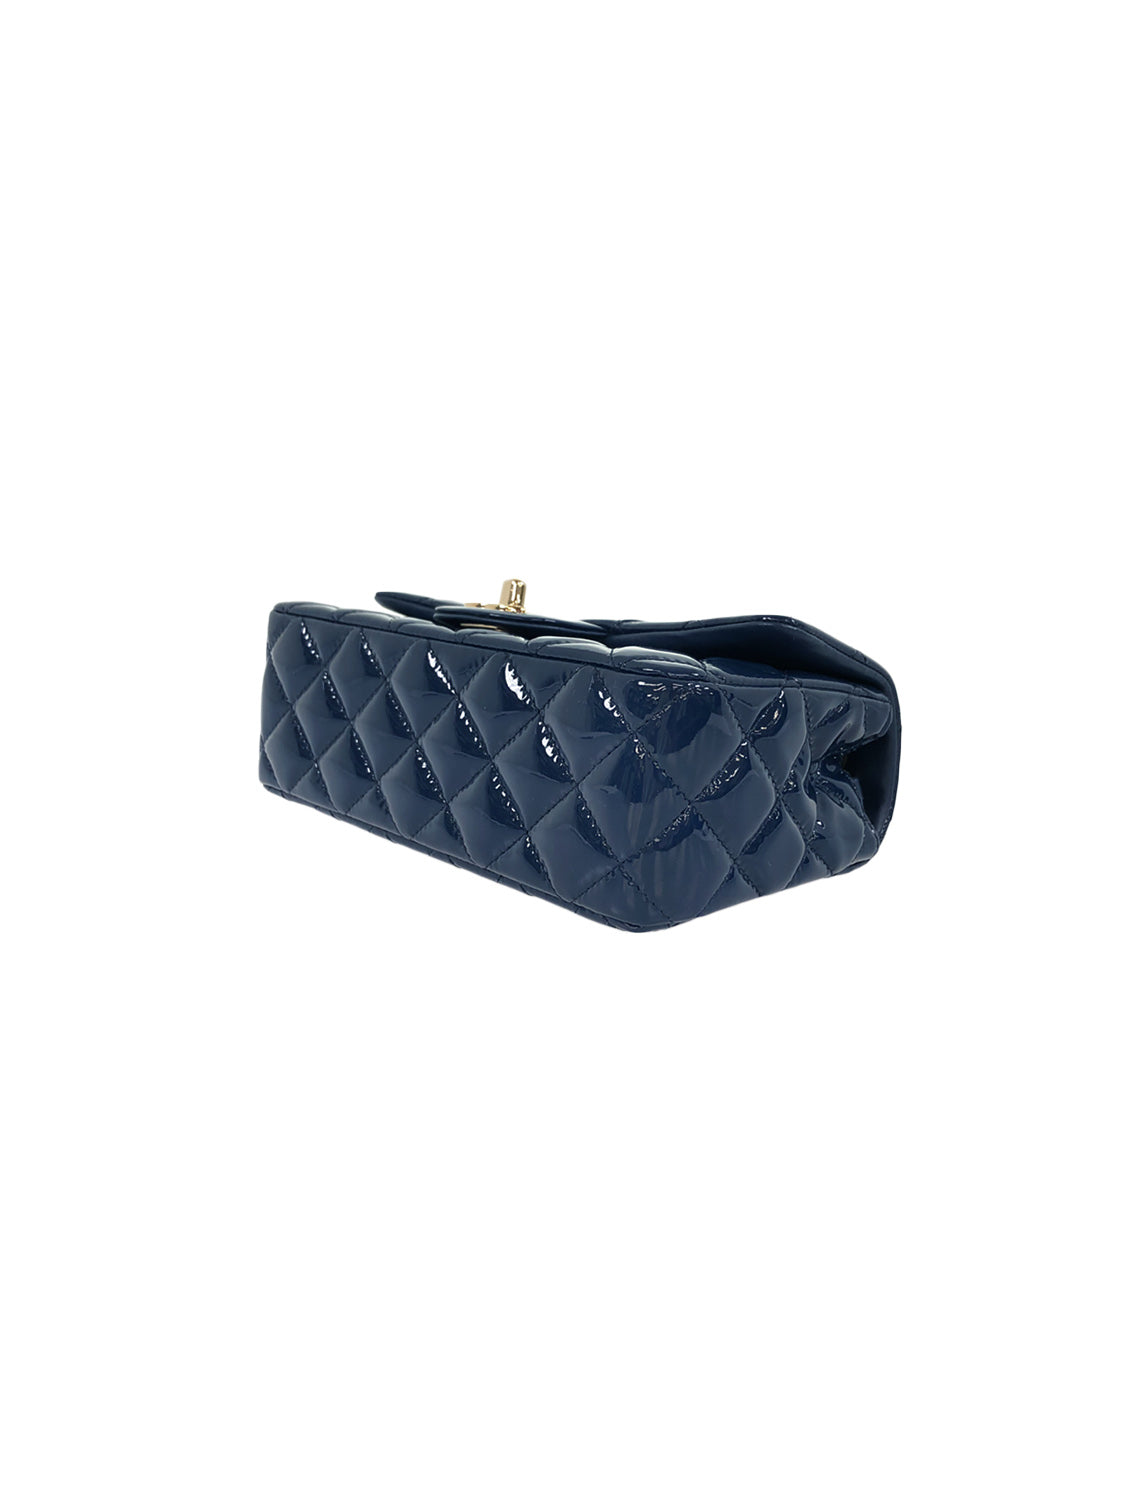 Chanel 2008 FW Rare Patent Navy Flap Bag · INTO